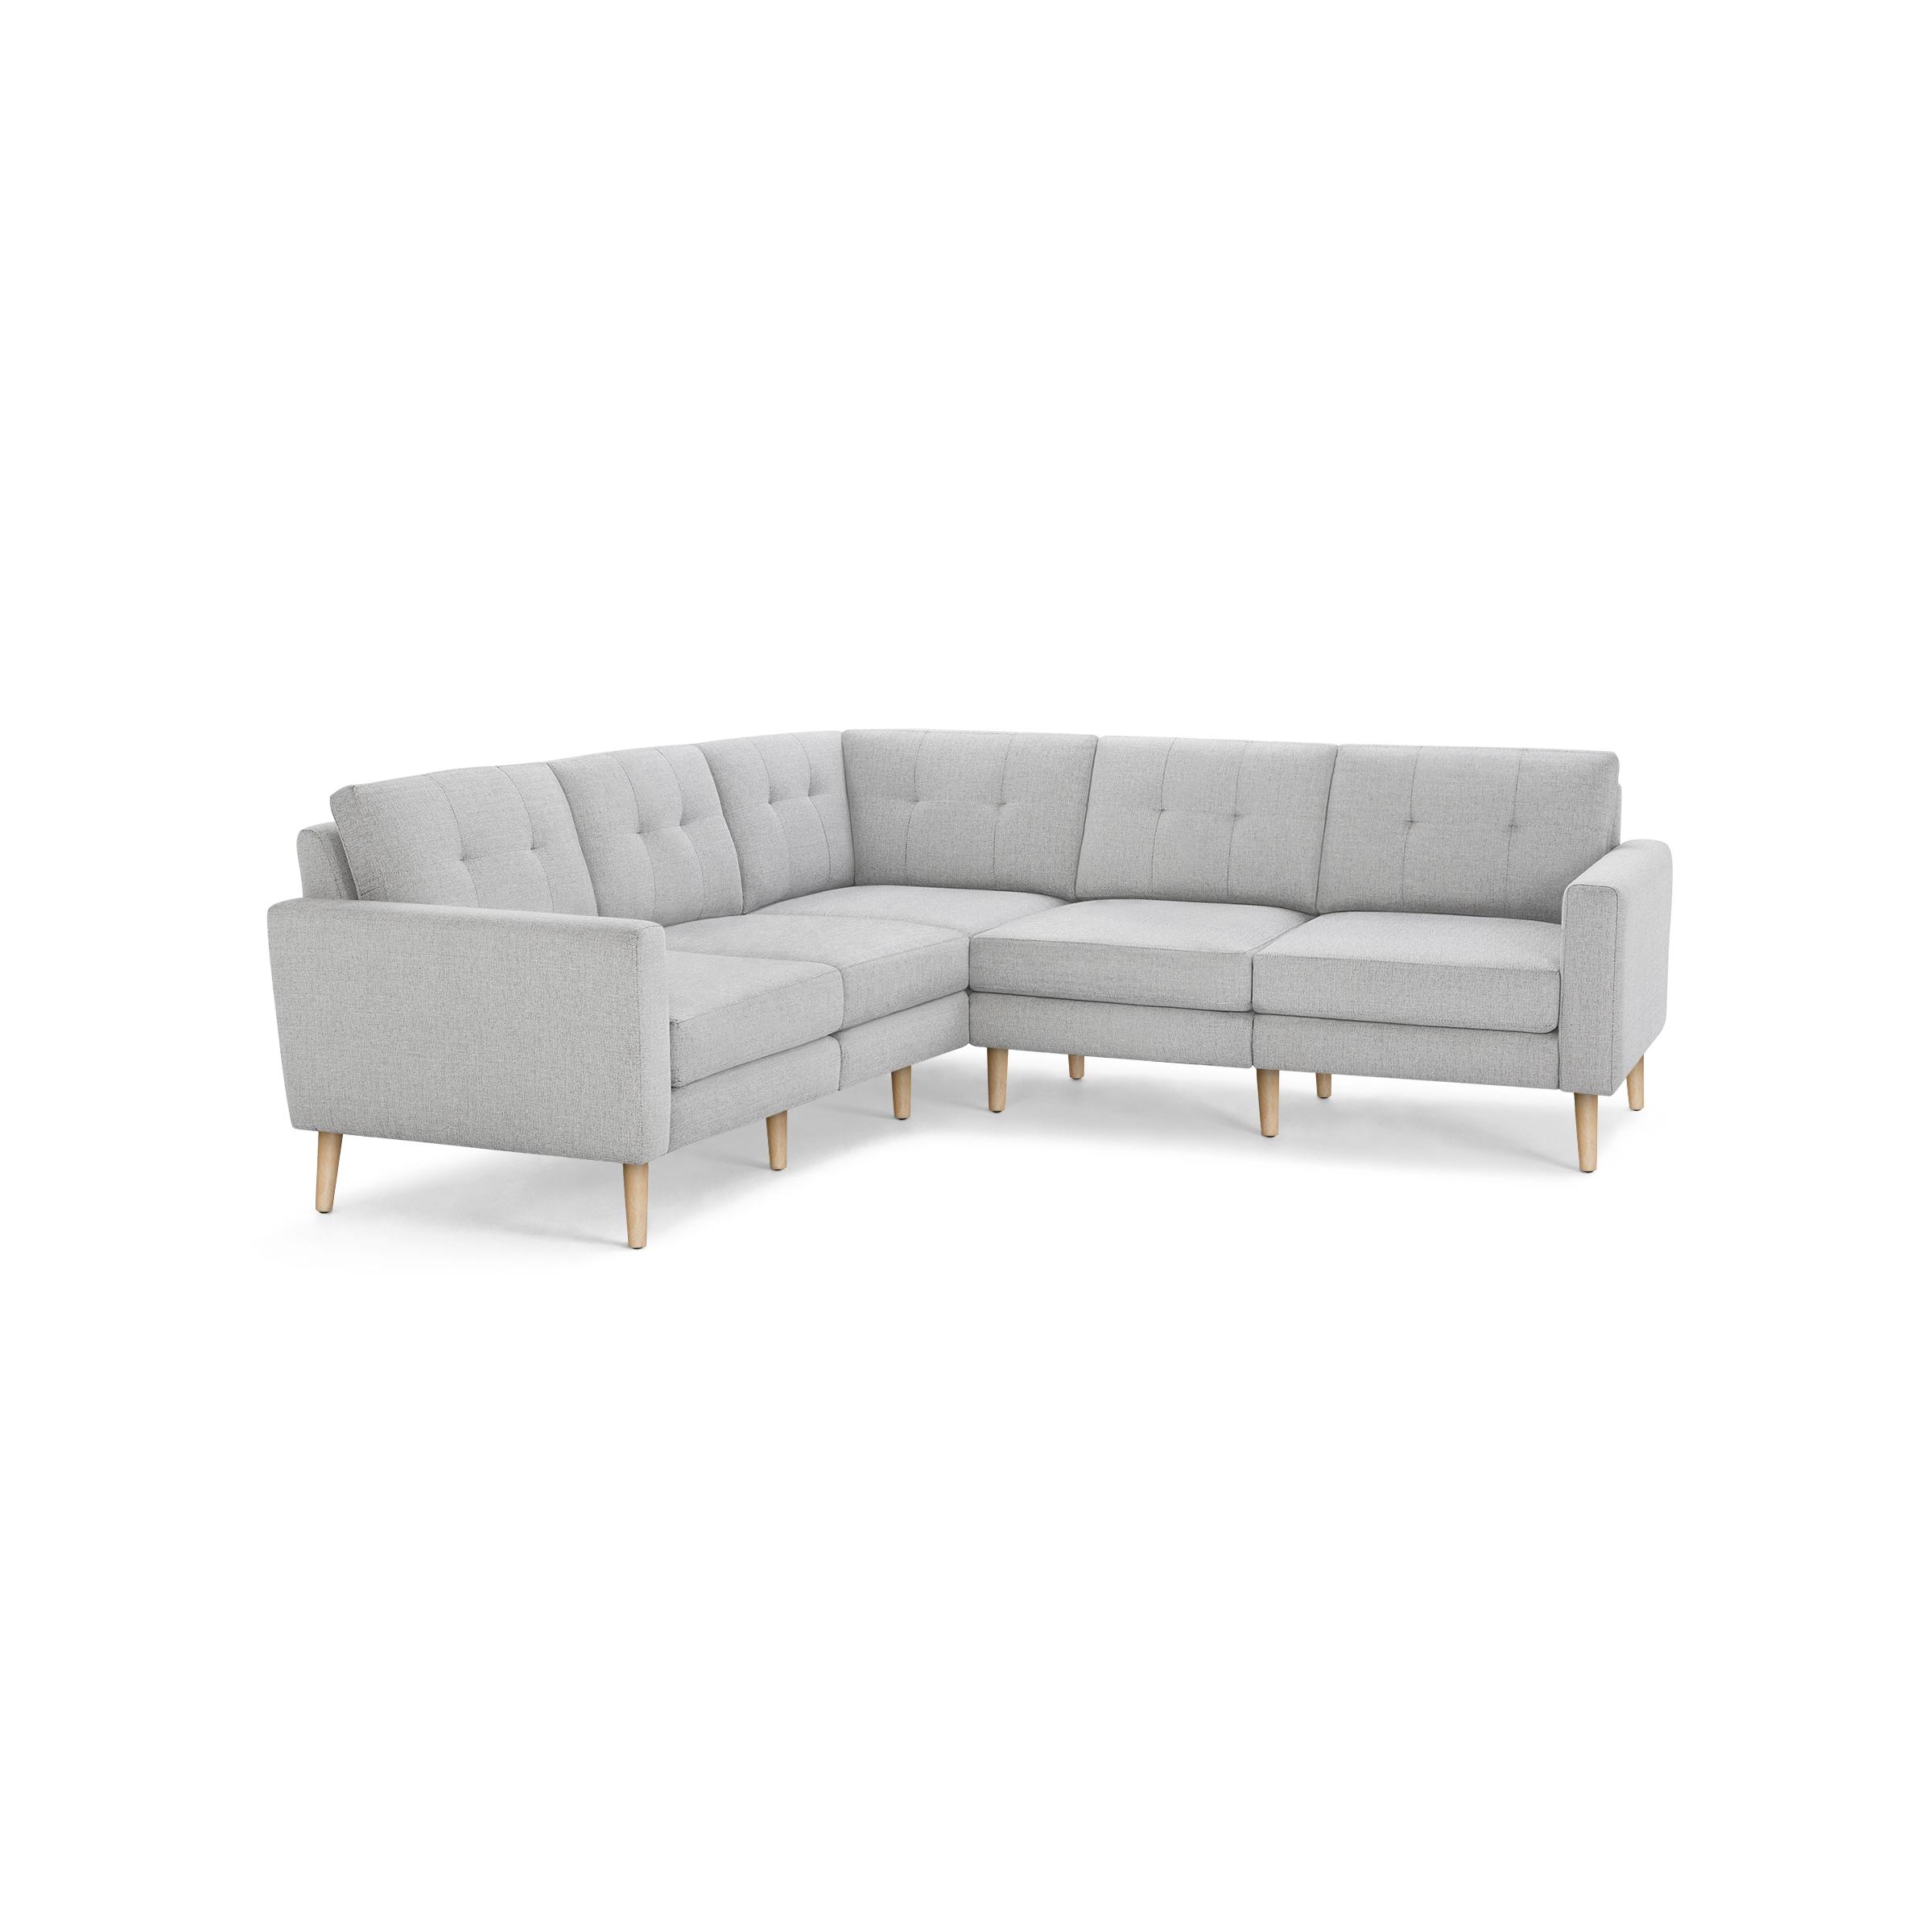 The Block Nomad 5-Seat Corner Sectional in Crushed Gravel, Oak Legs - Image 0